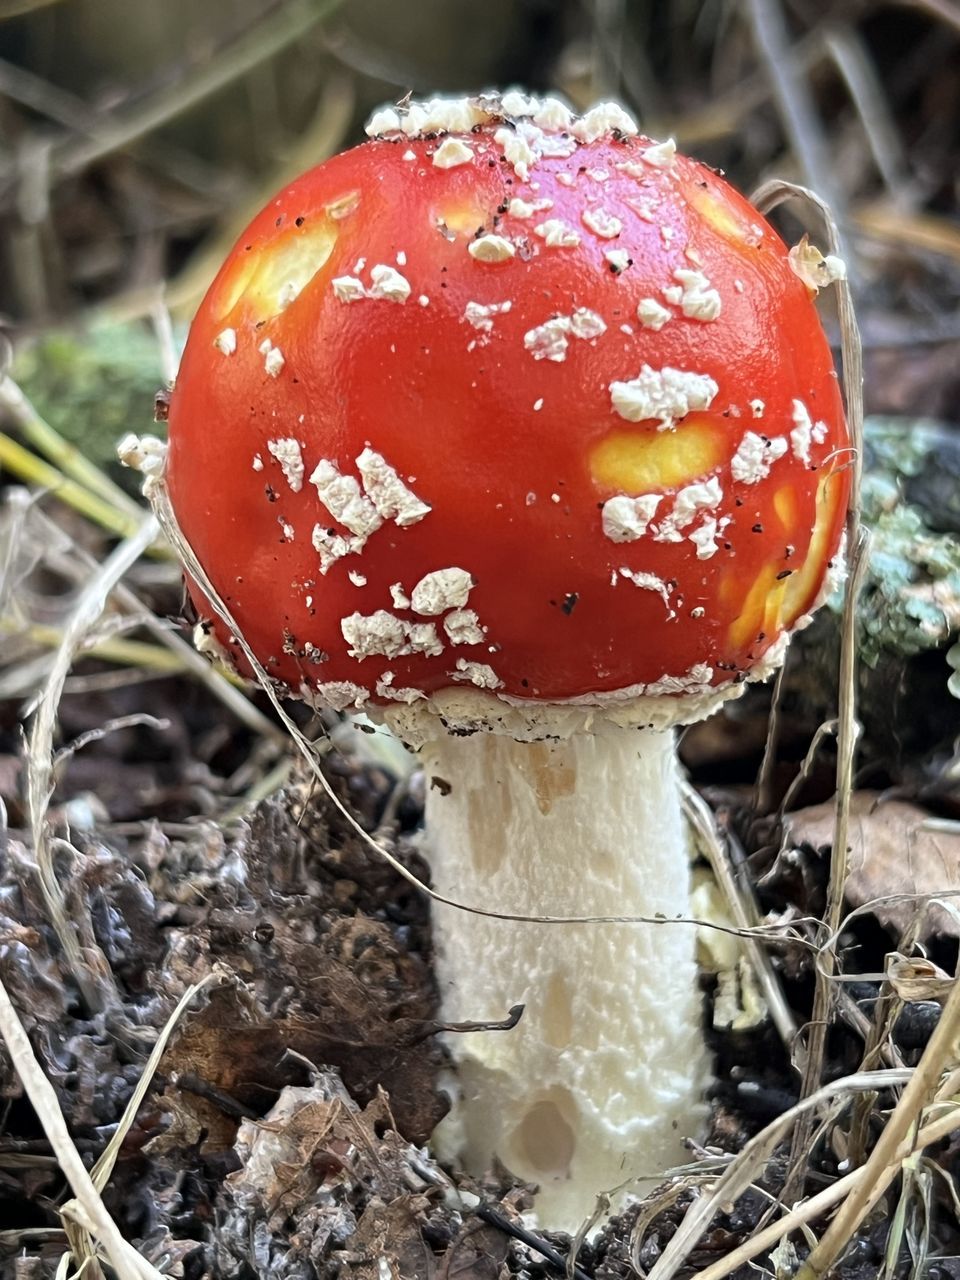 food, red, vegetable, nature, plant, mushroom, macro photography, close-up, fungus, growth, food and drink, no people, edible mushroom, fly agaric mushroom, land, focus on foreground, day, autumn, agaric, outdoors, tree, twig, high angle view, flower, toadstool, poisonous, fragility